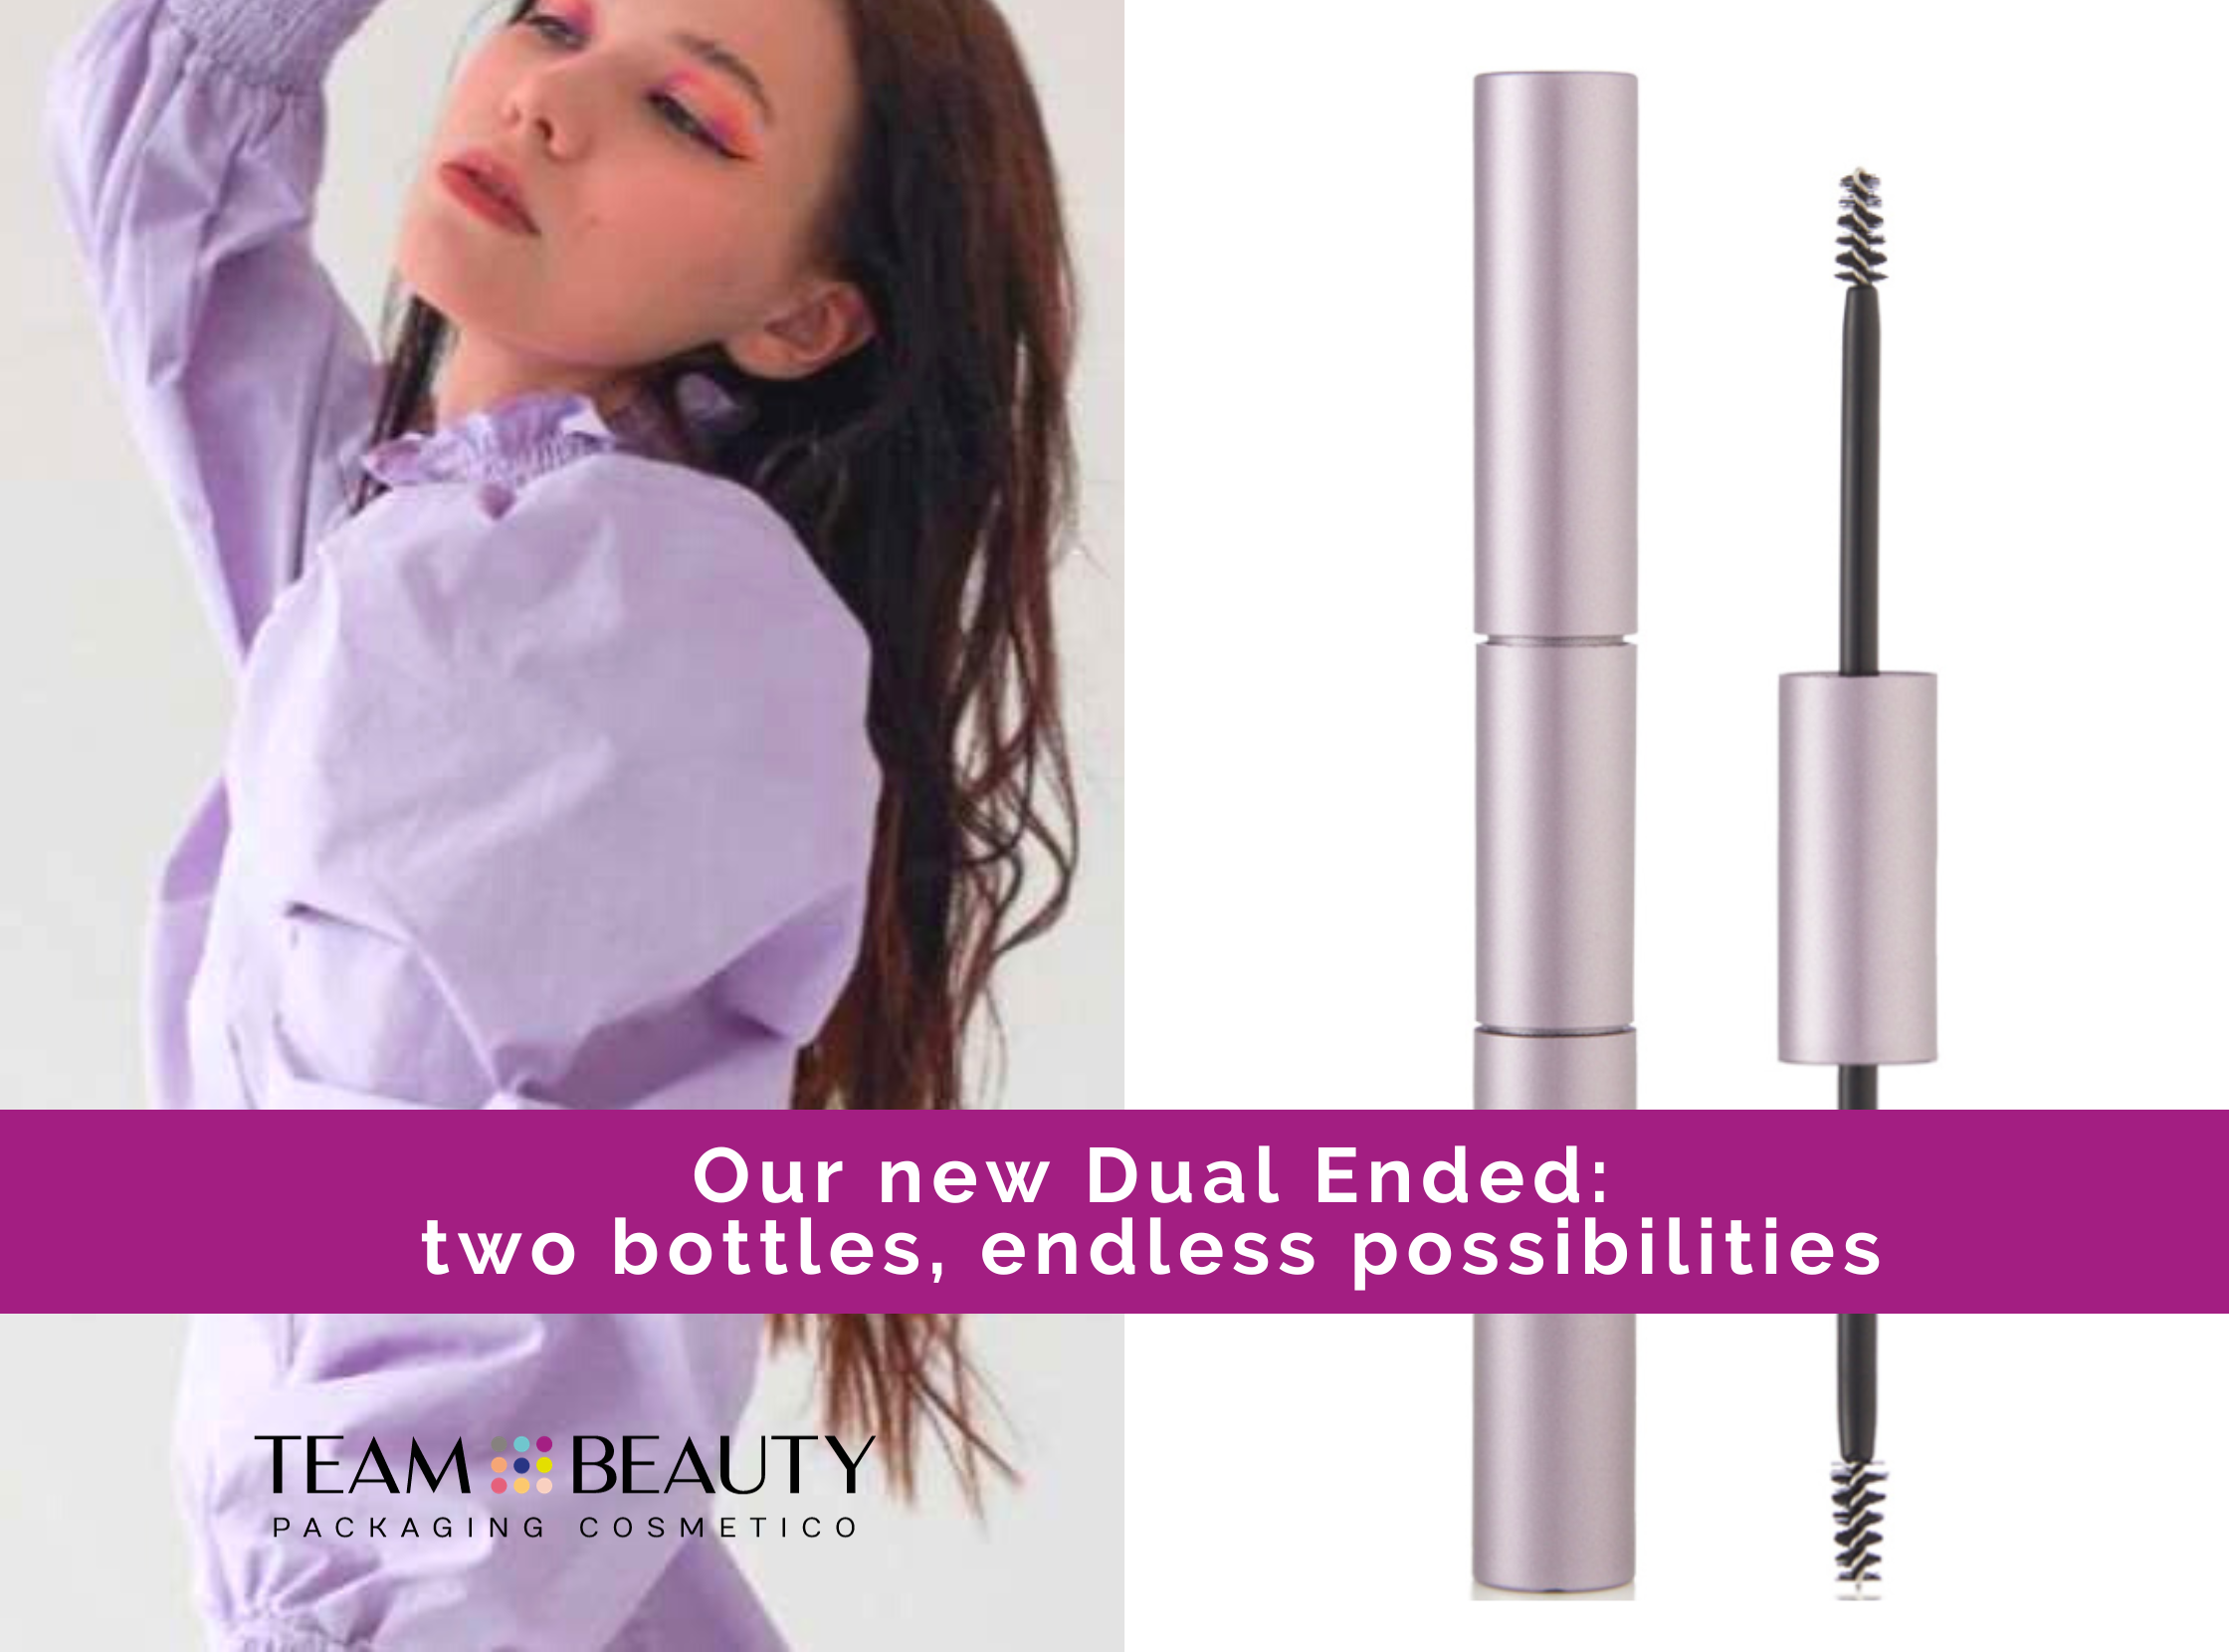 Our new Dual Ended: two bottles, endless possibilities